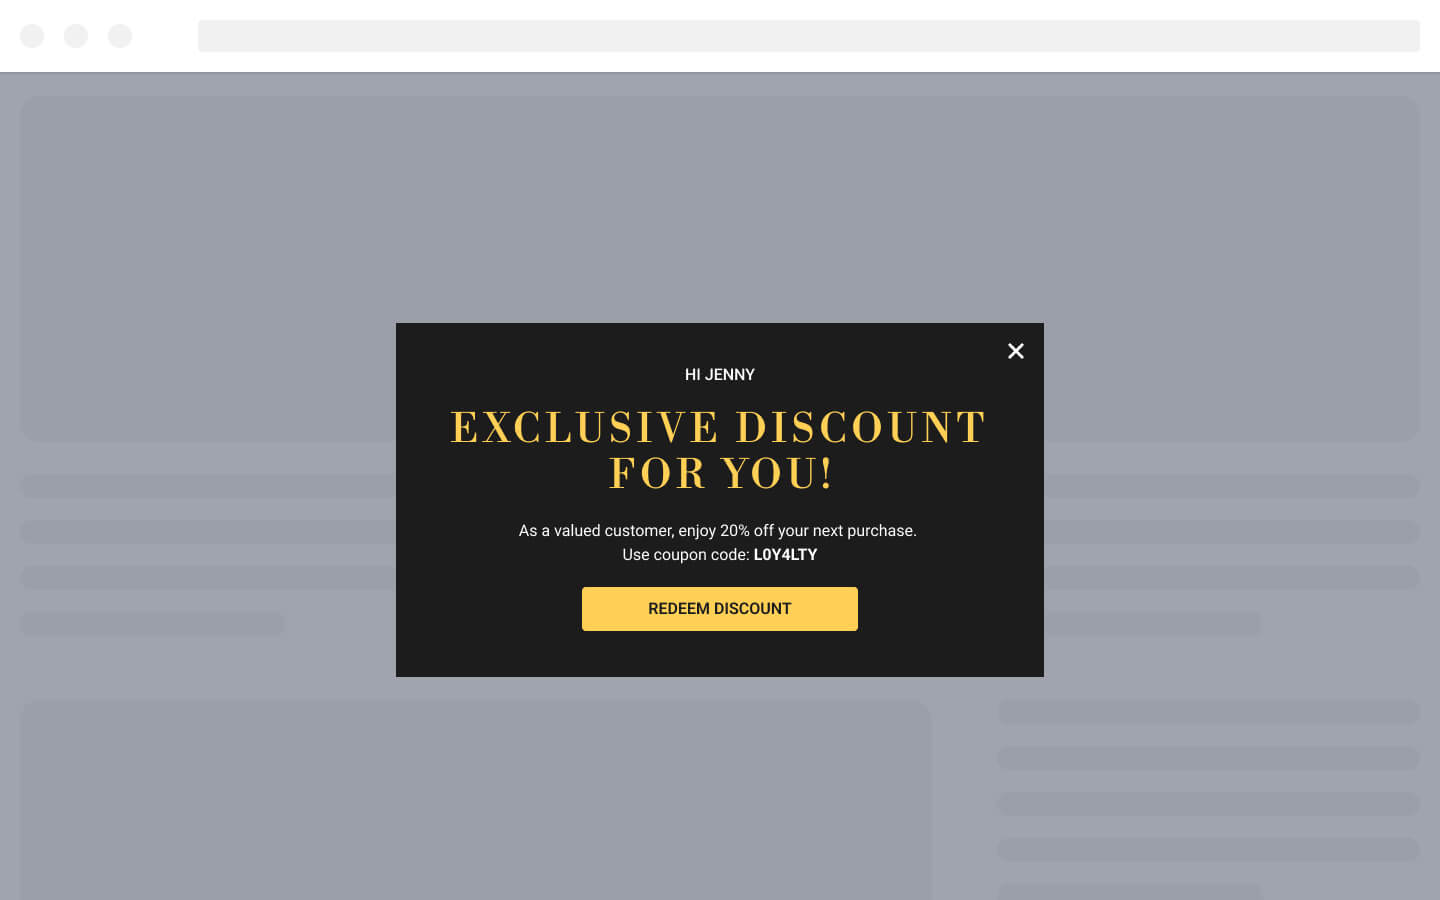 WooCommerce Exclusive Discount Popup for Repeat Customers of a Specific Product